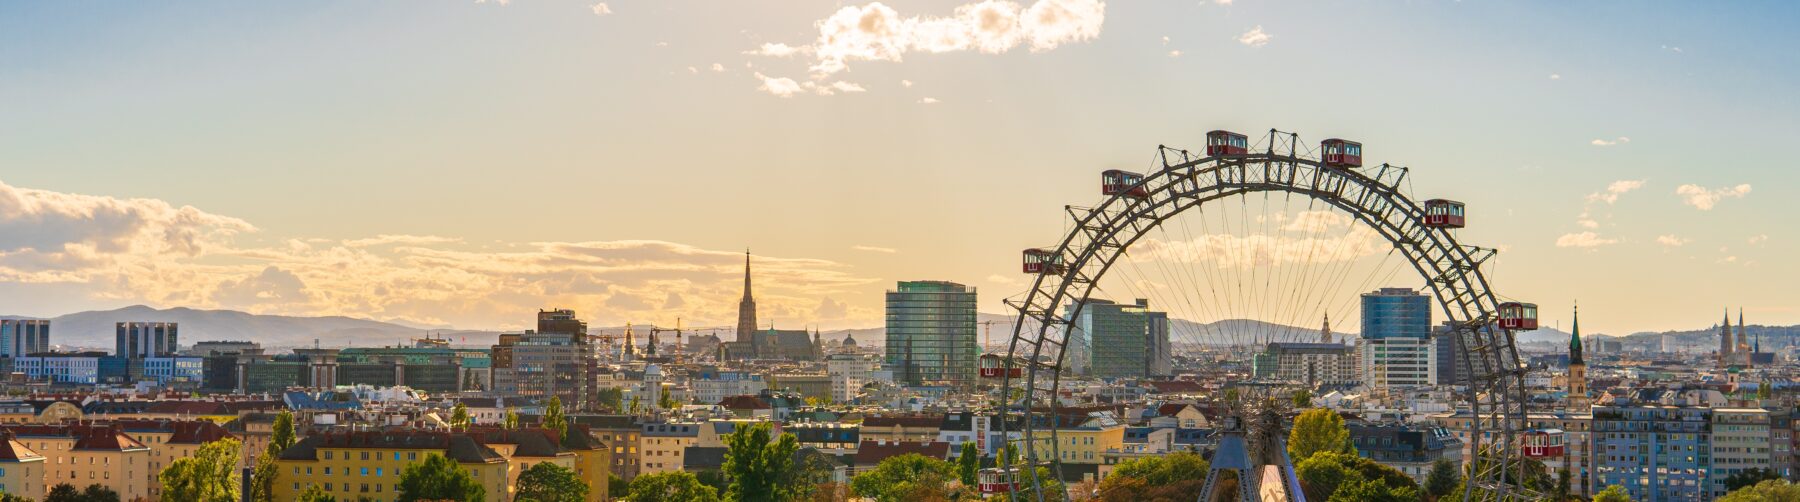 View of Vienna - in the foreground the Prater with the ferris wheel. Behind St. Stephen's Cathedral, skyscrapers, and hills.